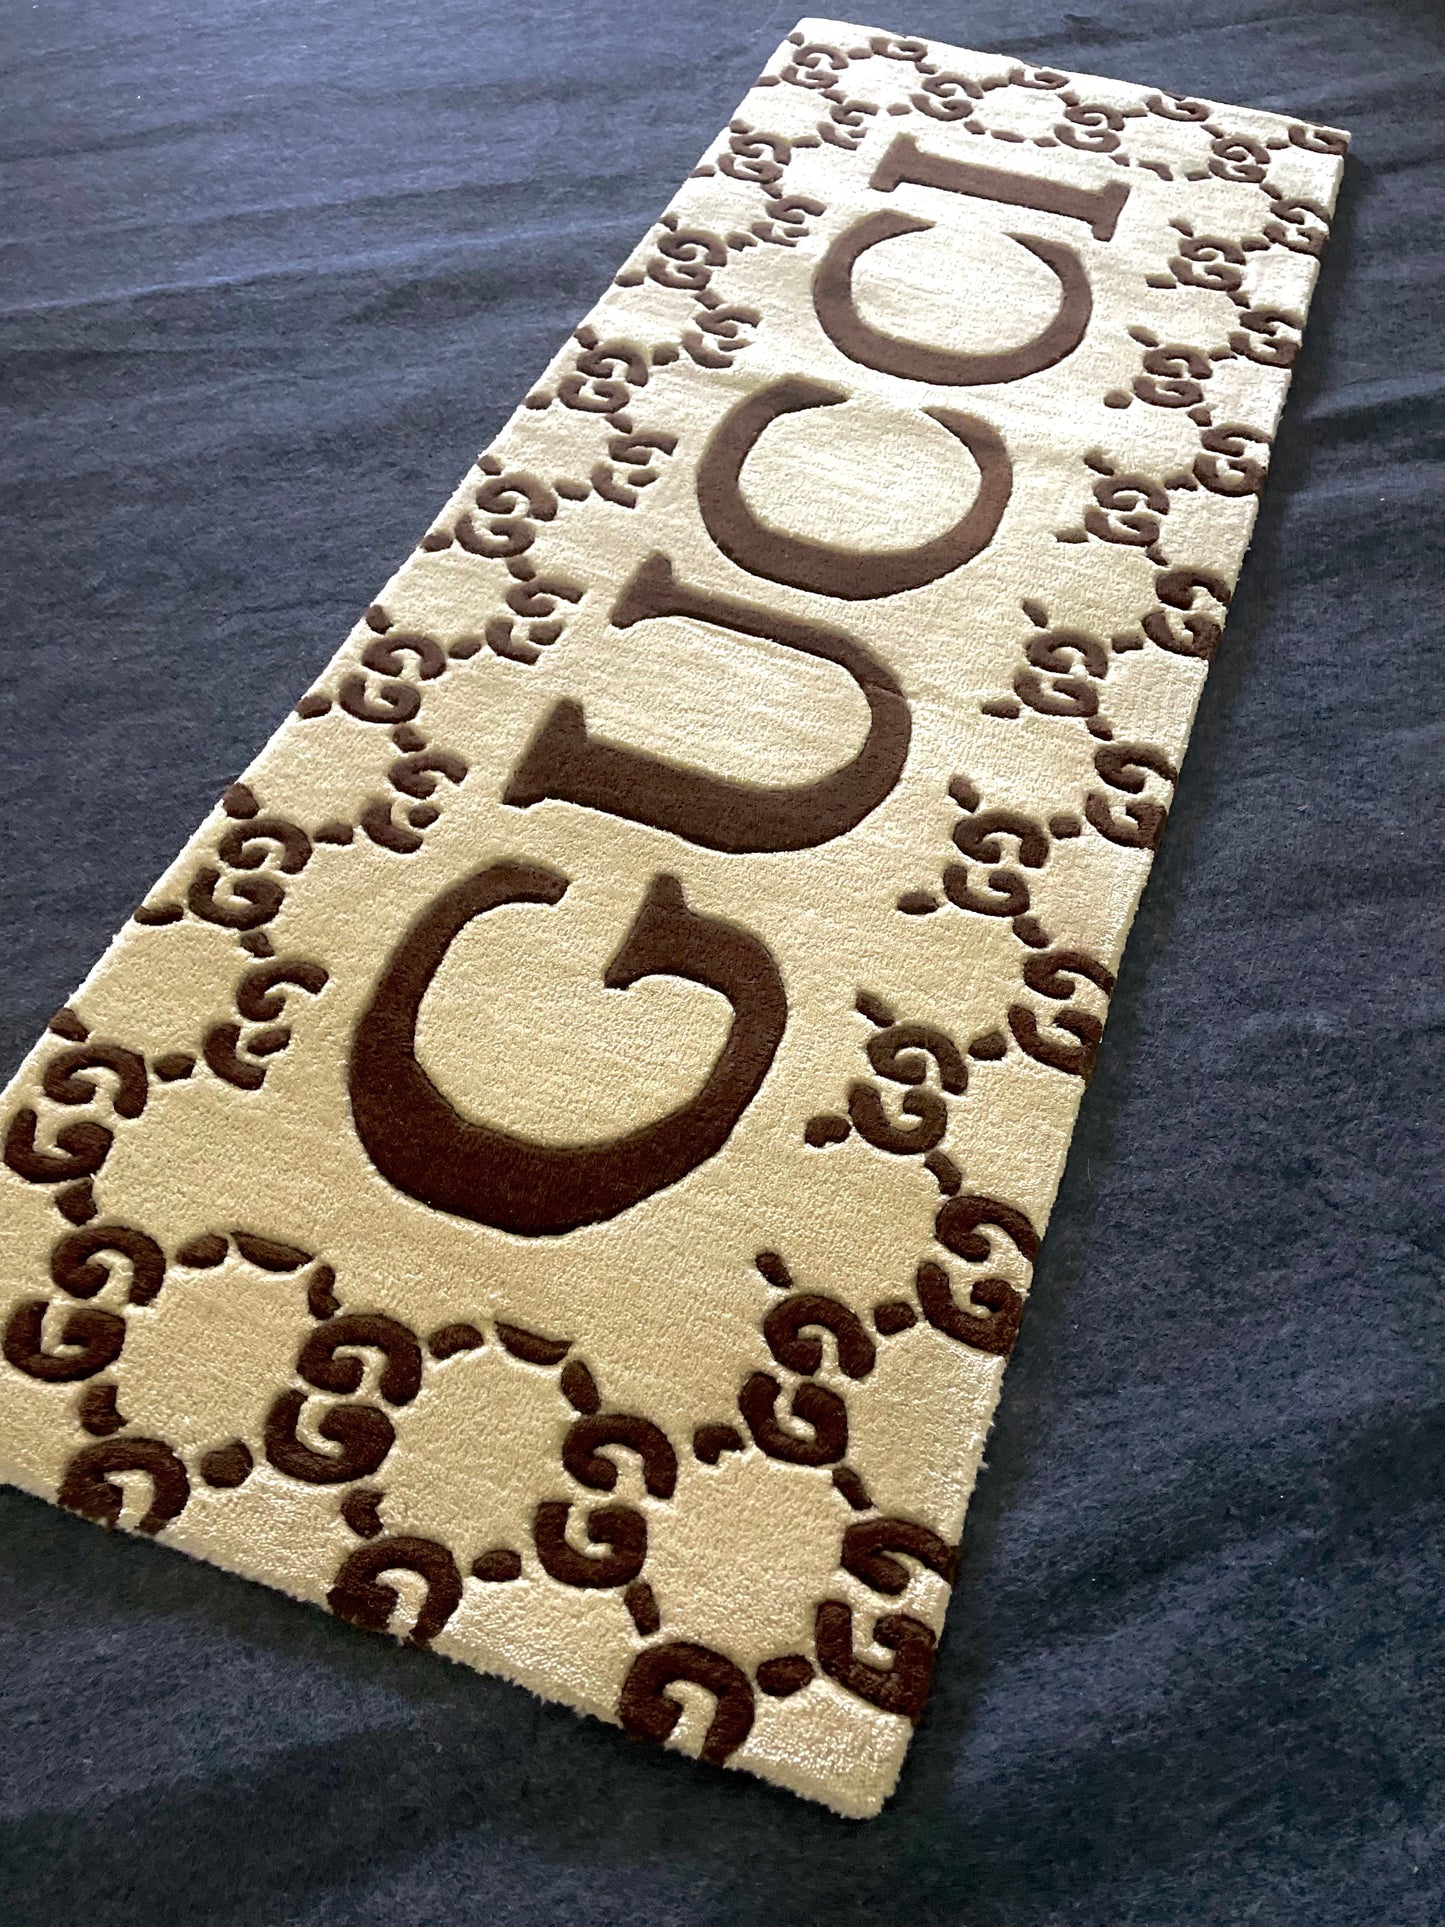 Gucci Brand Hand-Tufted Rug